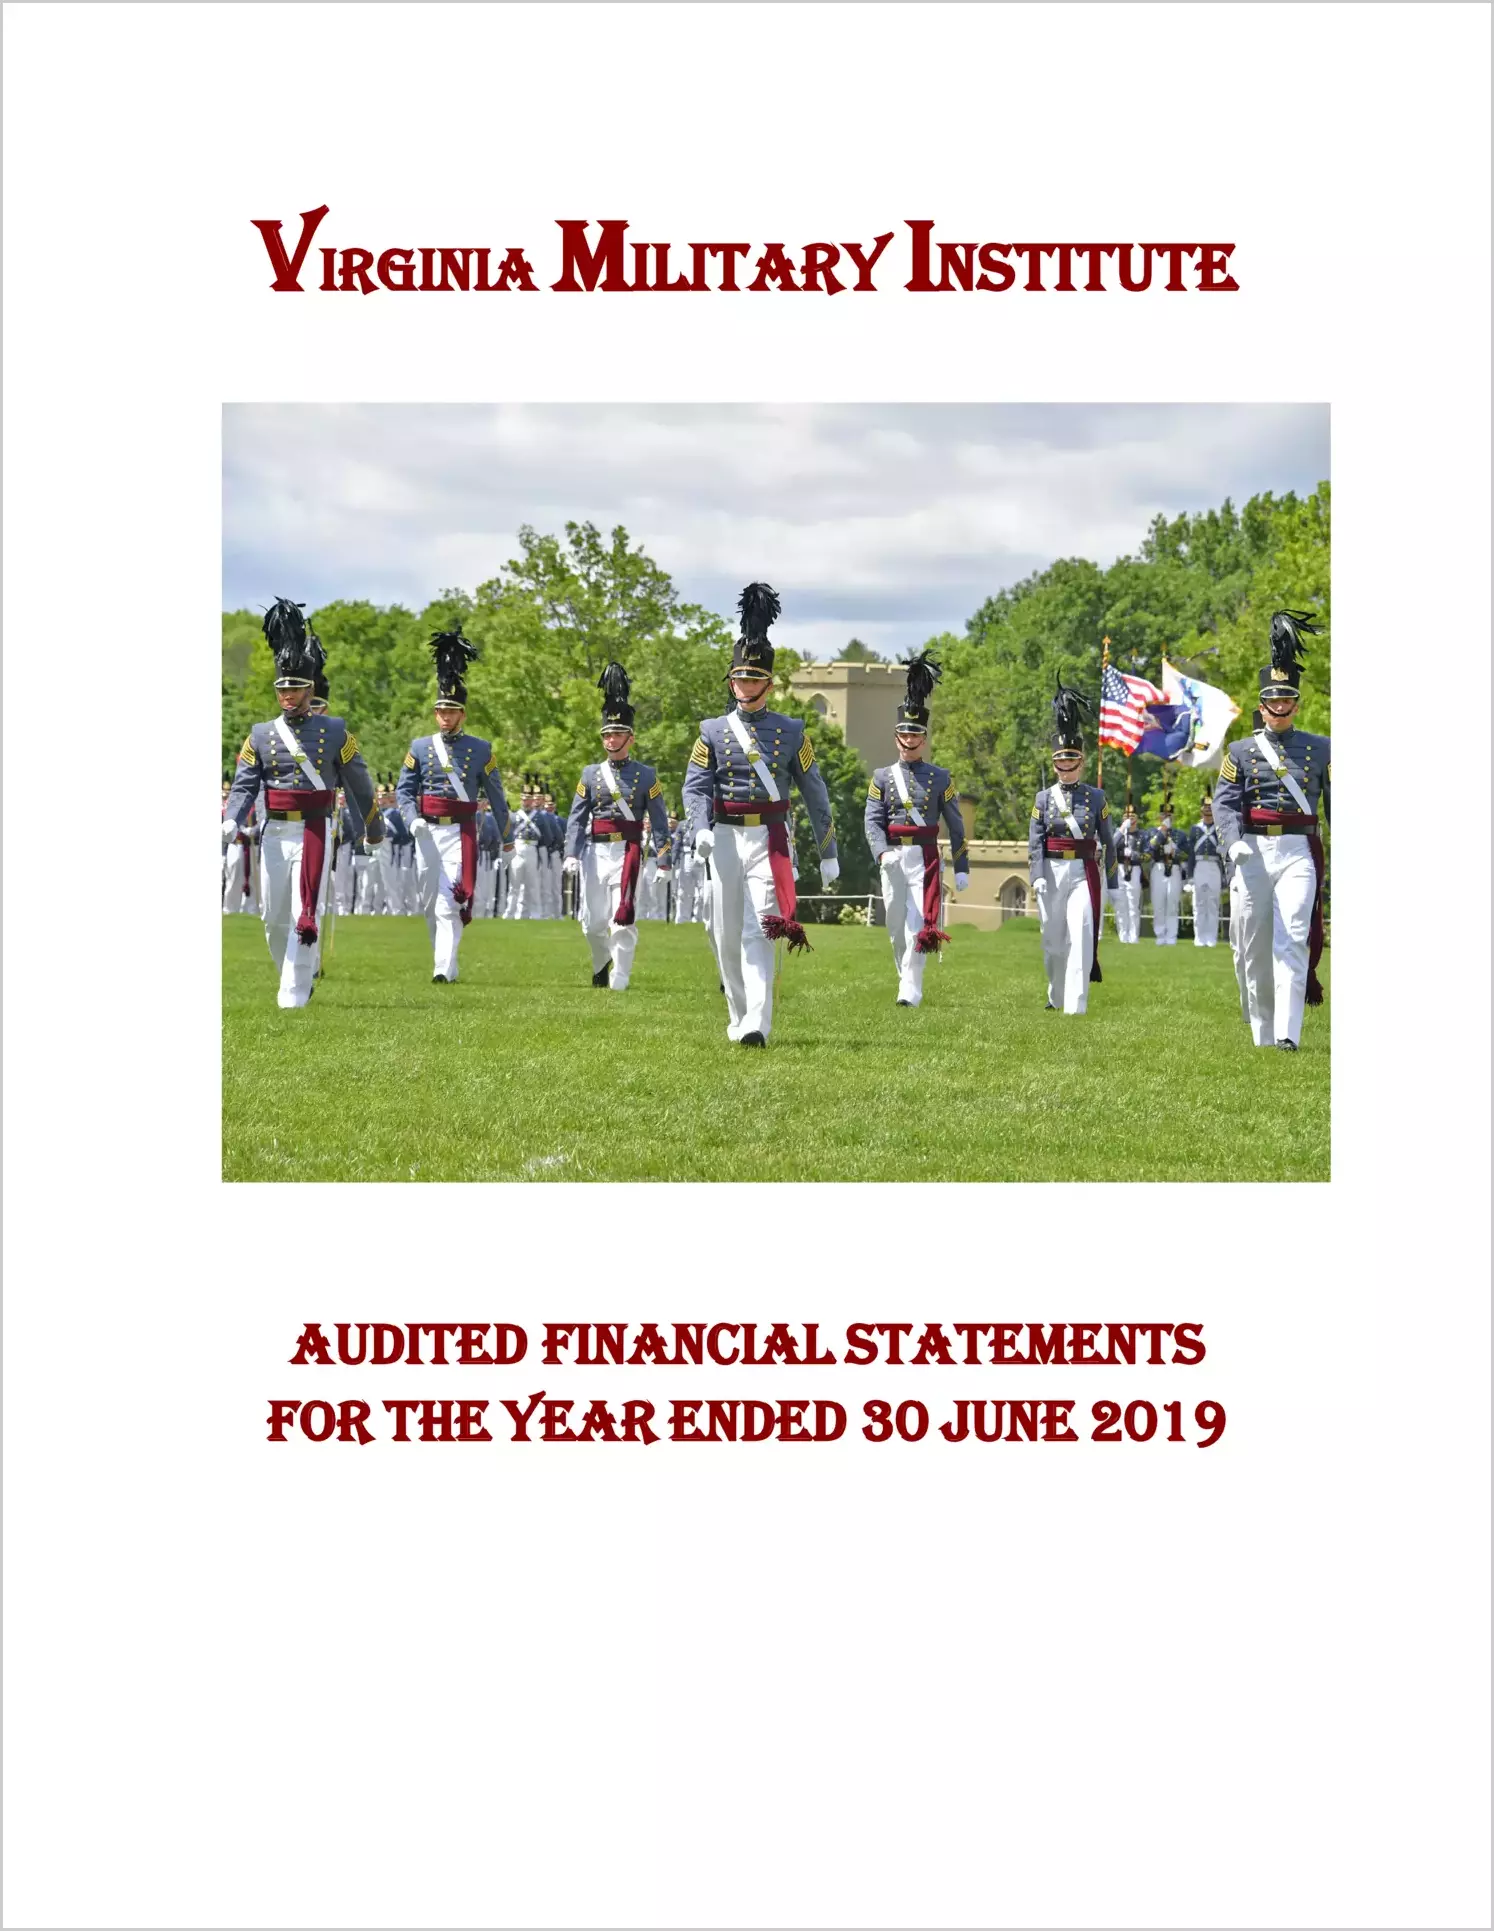 Virginia Military Institute Financial Statements for the year ended June 30, 2019